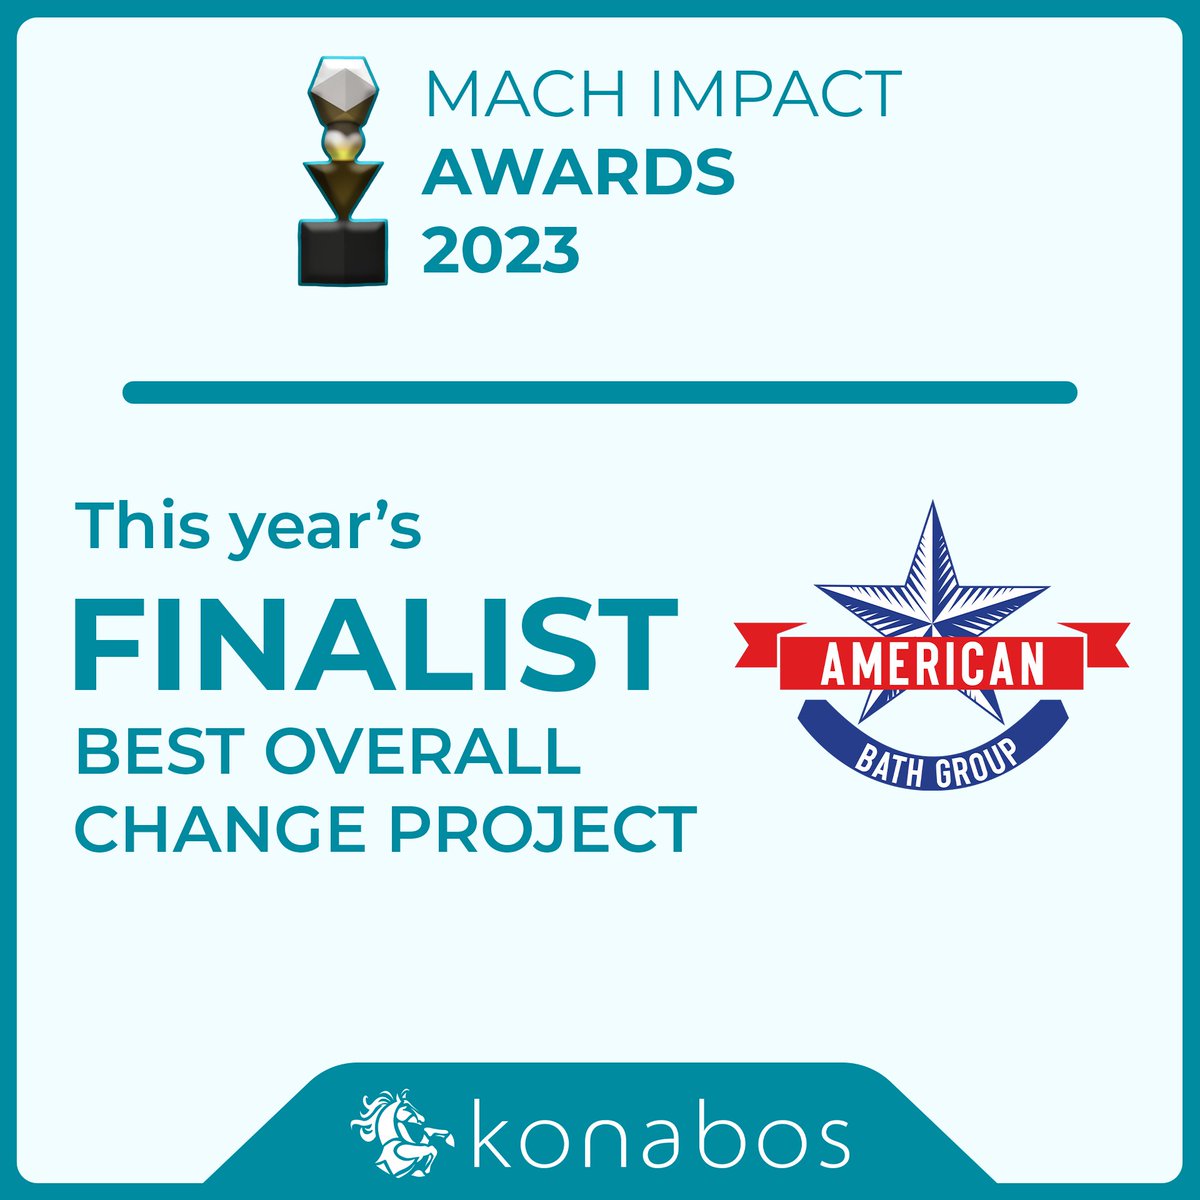 We are rooting for our client, American Bath Group, at the @MACHAlliance Impact Awards, where they have been nominated for the 'Best Overall Change Project'! 🏆 

The winner will be announced tomorrow. Show your support by commenting 'ABG'! 👏

#MACHImpactAwards2023 #MACHTWO